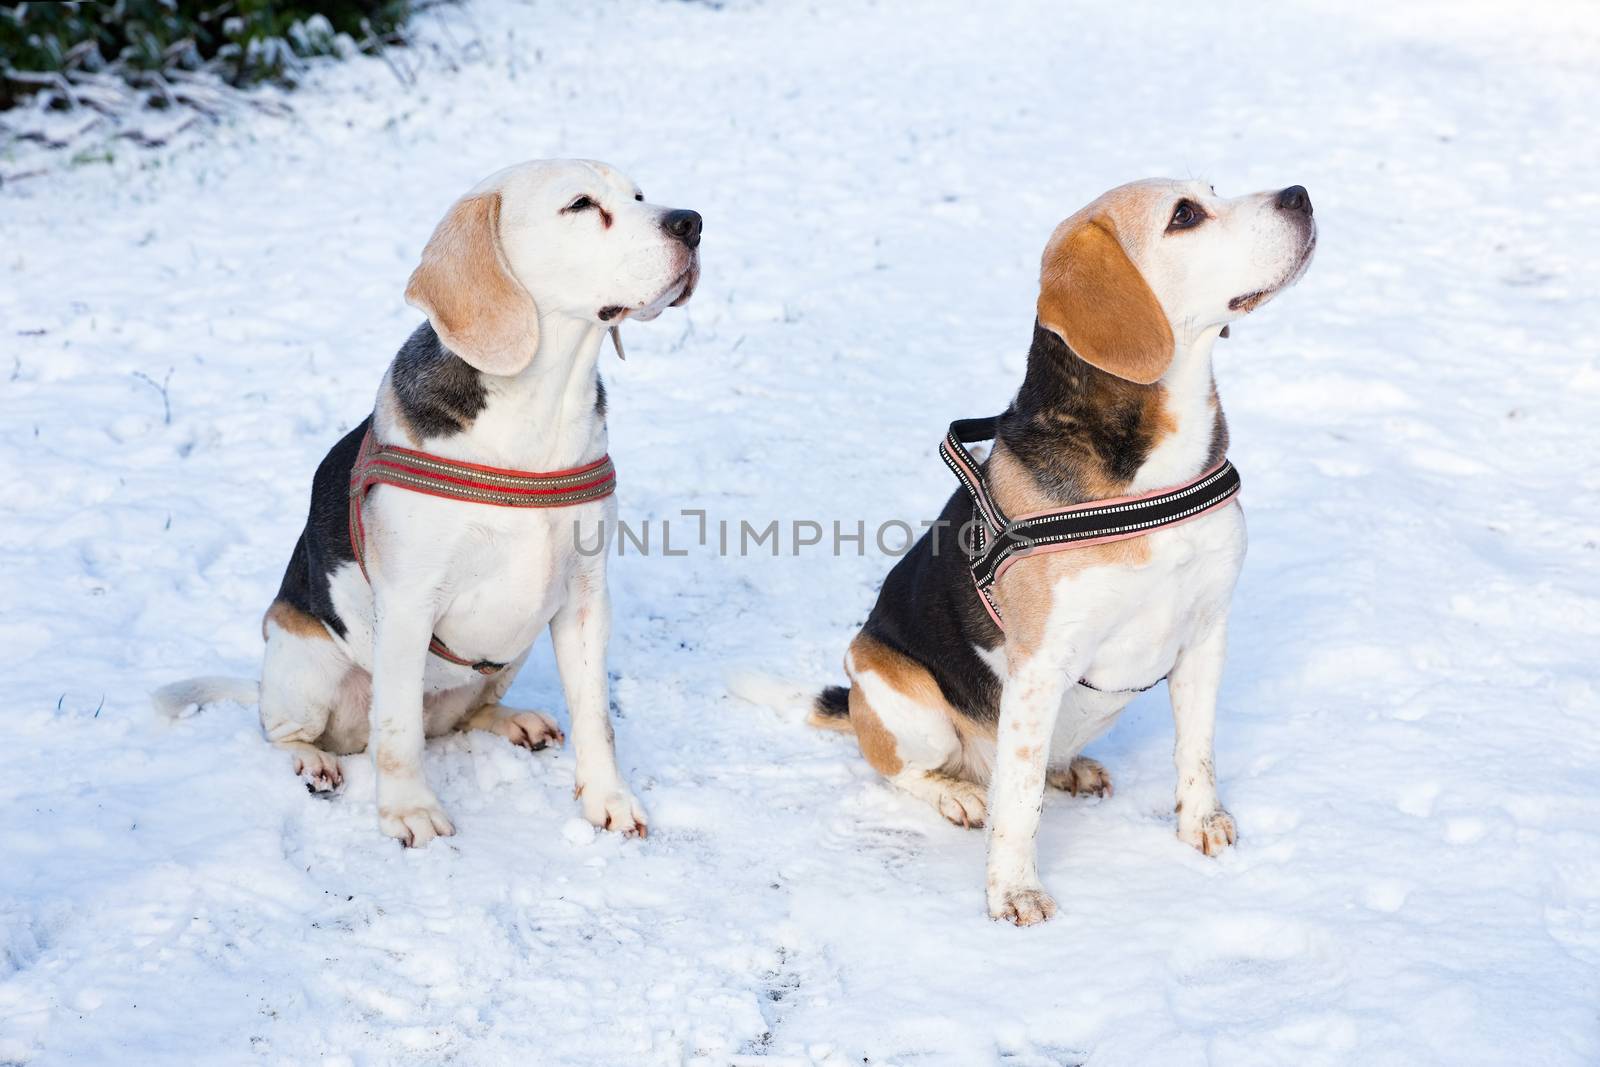 Two hunting dogs sitting together in snow during winter season